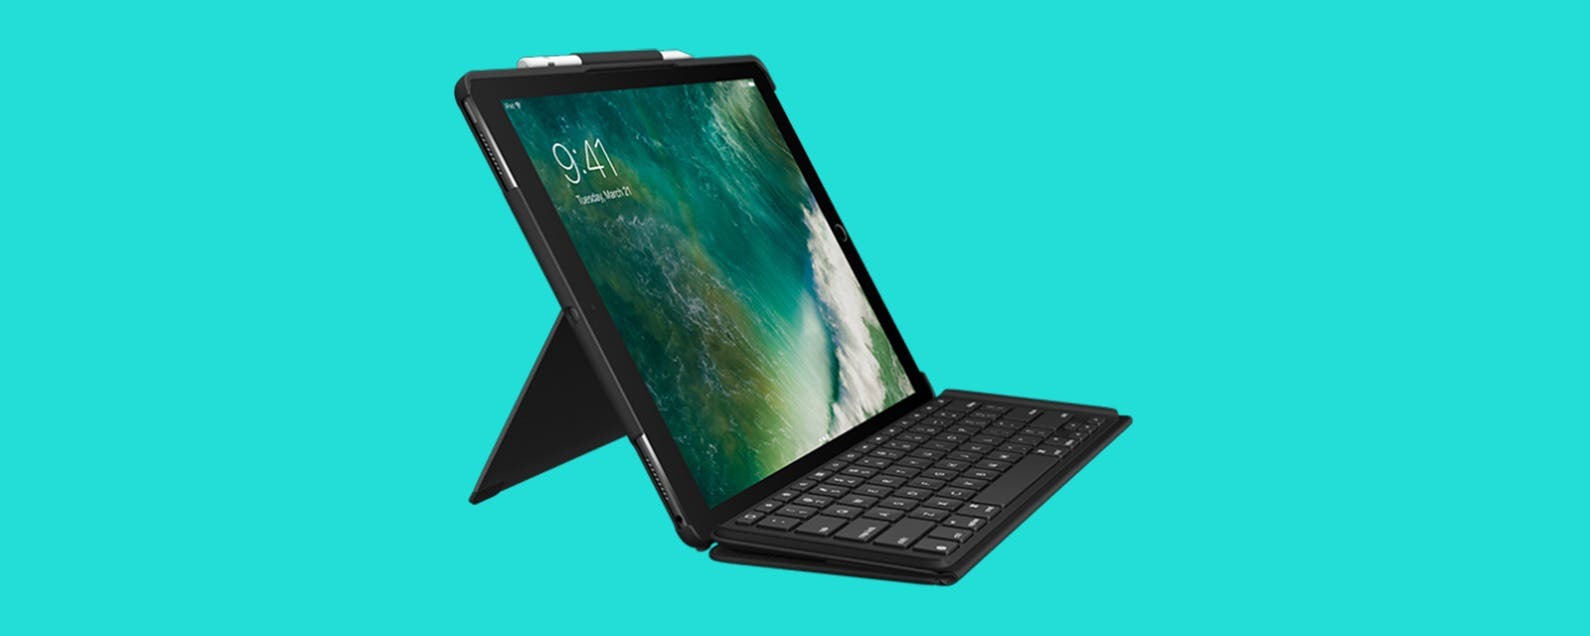 Must-Have Accessories for the iPad Keyboards, & More!